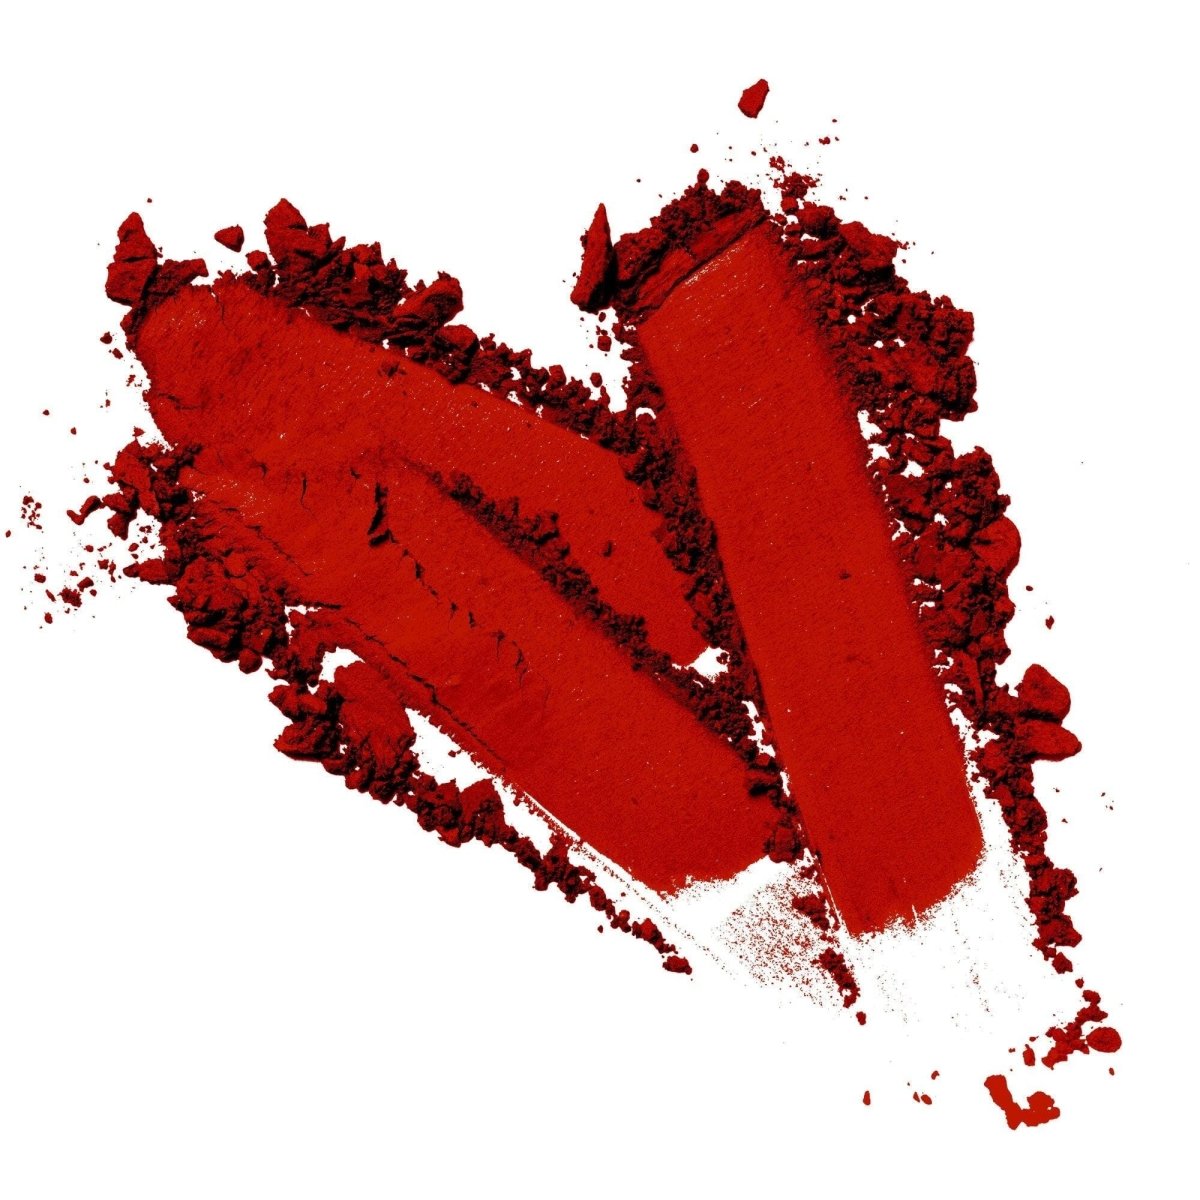 A vibrant red vegan eyeshadow powder formed into a heart shape on a white base